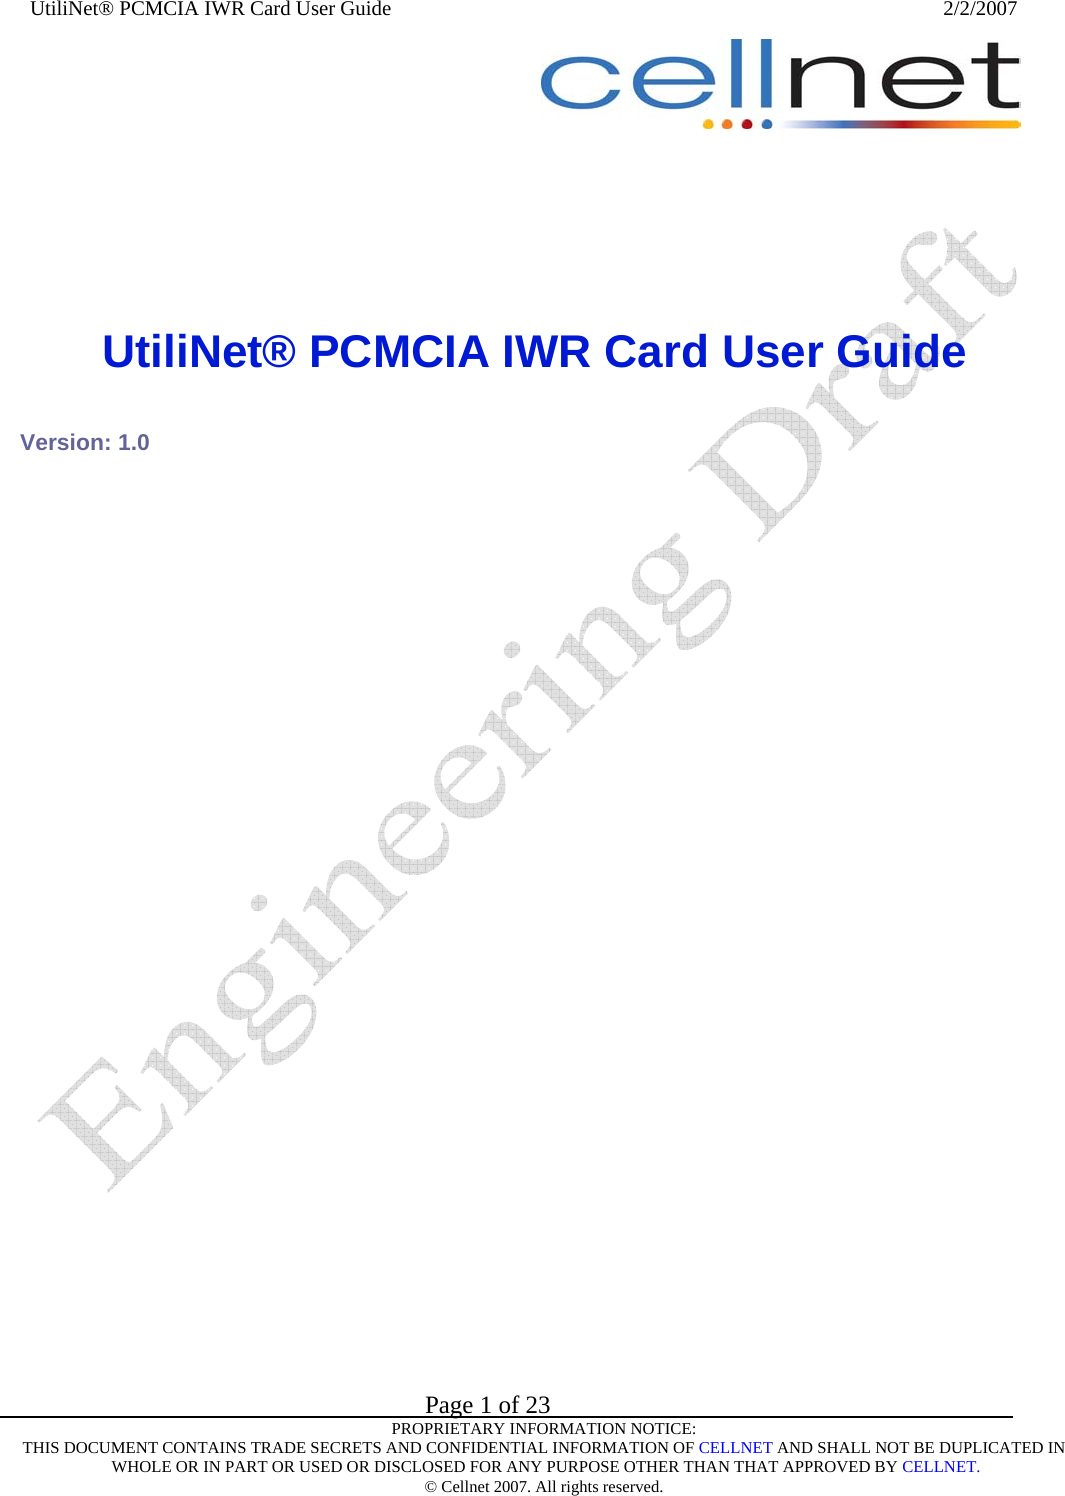 UtiliNet® PCMCIA IWR Card User Guide                                                                                                          2/2/2007   Page 1 of 23     PROPRIETARY INFORMATION NOTICE: THIS DOCUMENT CONTAINS TRADE SECRETS AND CONFIDENTIAL INFORMATION OF CELLNET AND SHALL NOT BE DUPLICATED IN  WHOLE OR IN PART OR USED OR DISCLOSED FOR ANY PURPOSE OTHER THAN THAT APPROVED BY CELLNET. © Cellnet 2007. All rights reserved.    UtiliNet® PCMCIA IWR Card User Guide   Version: 1.0 